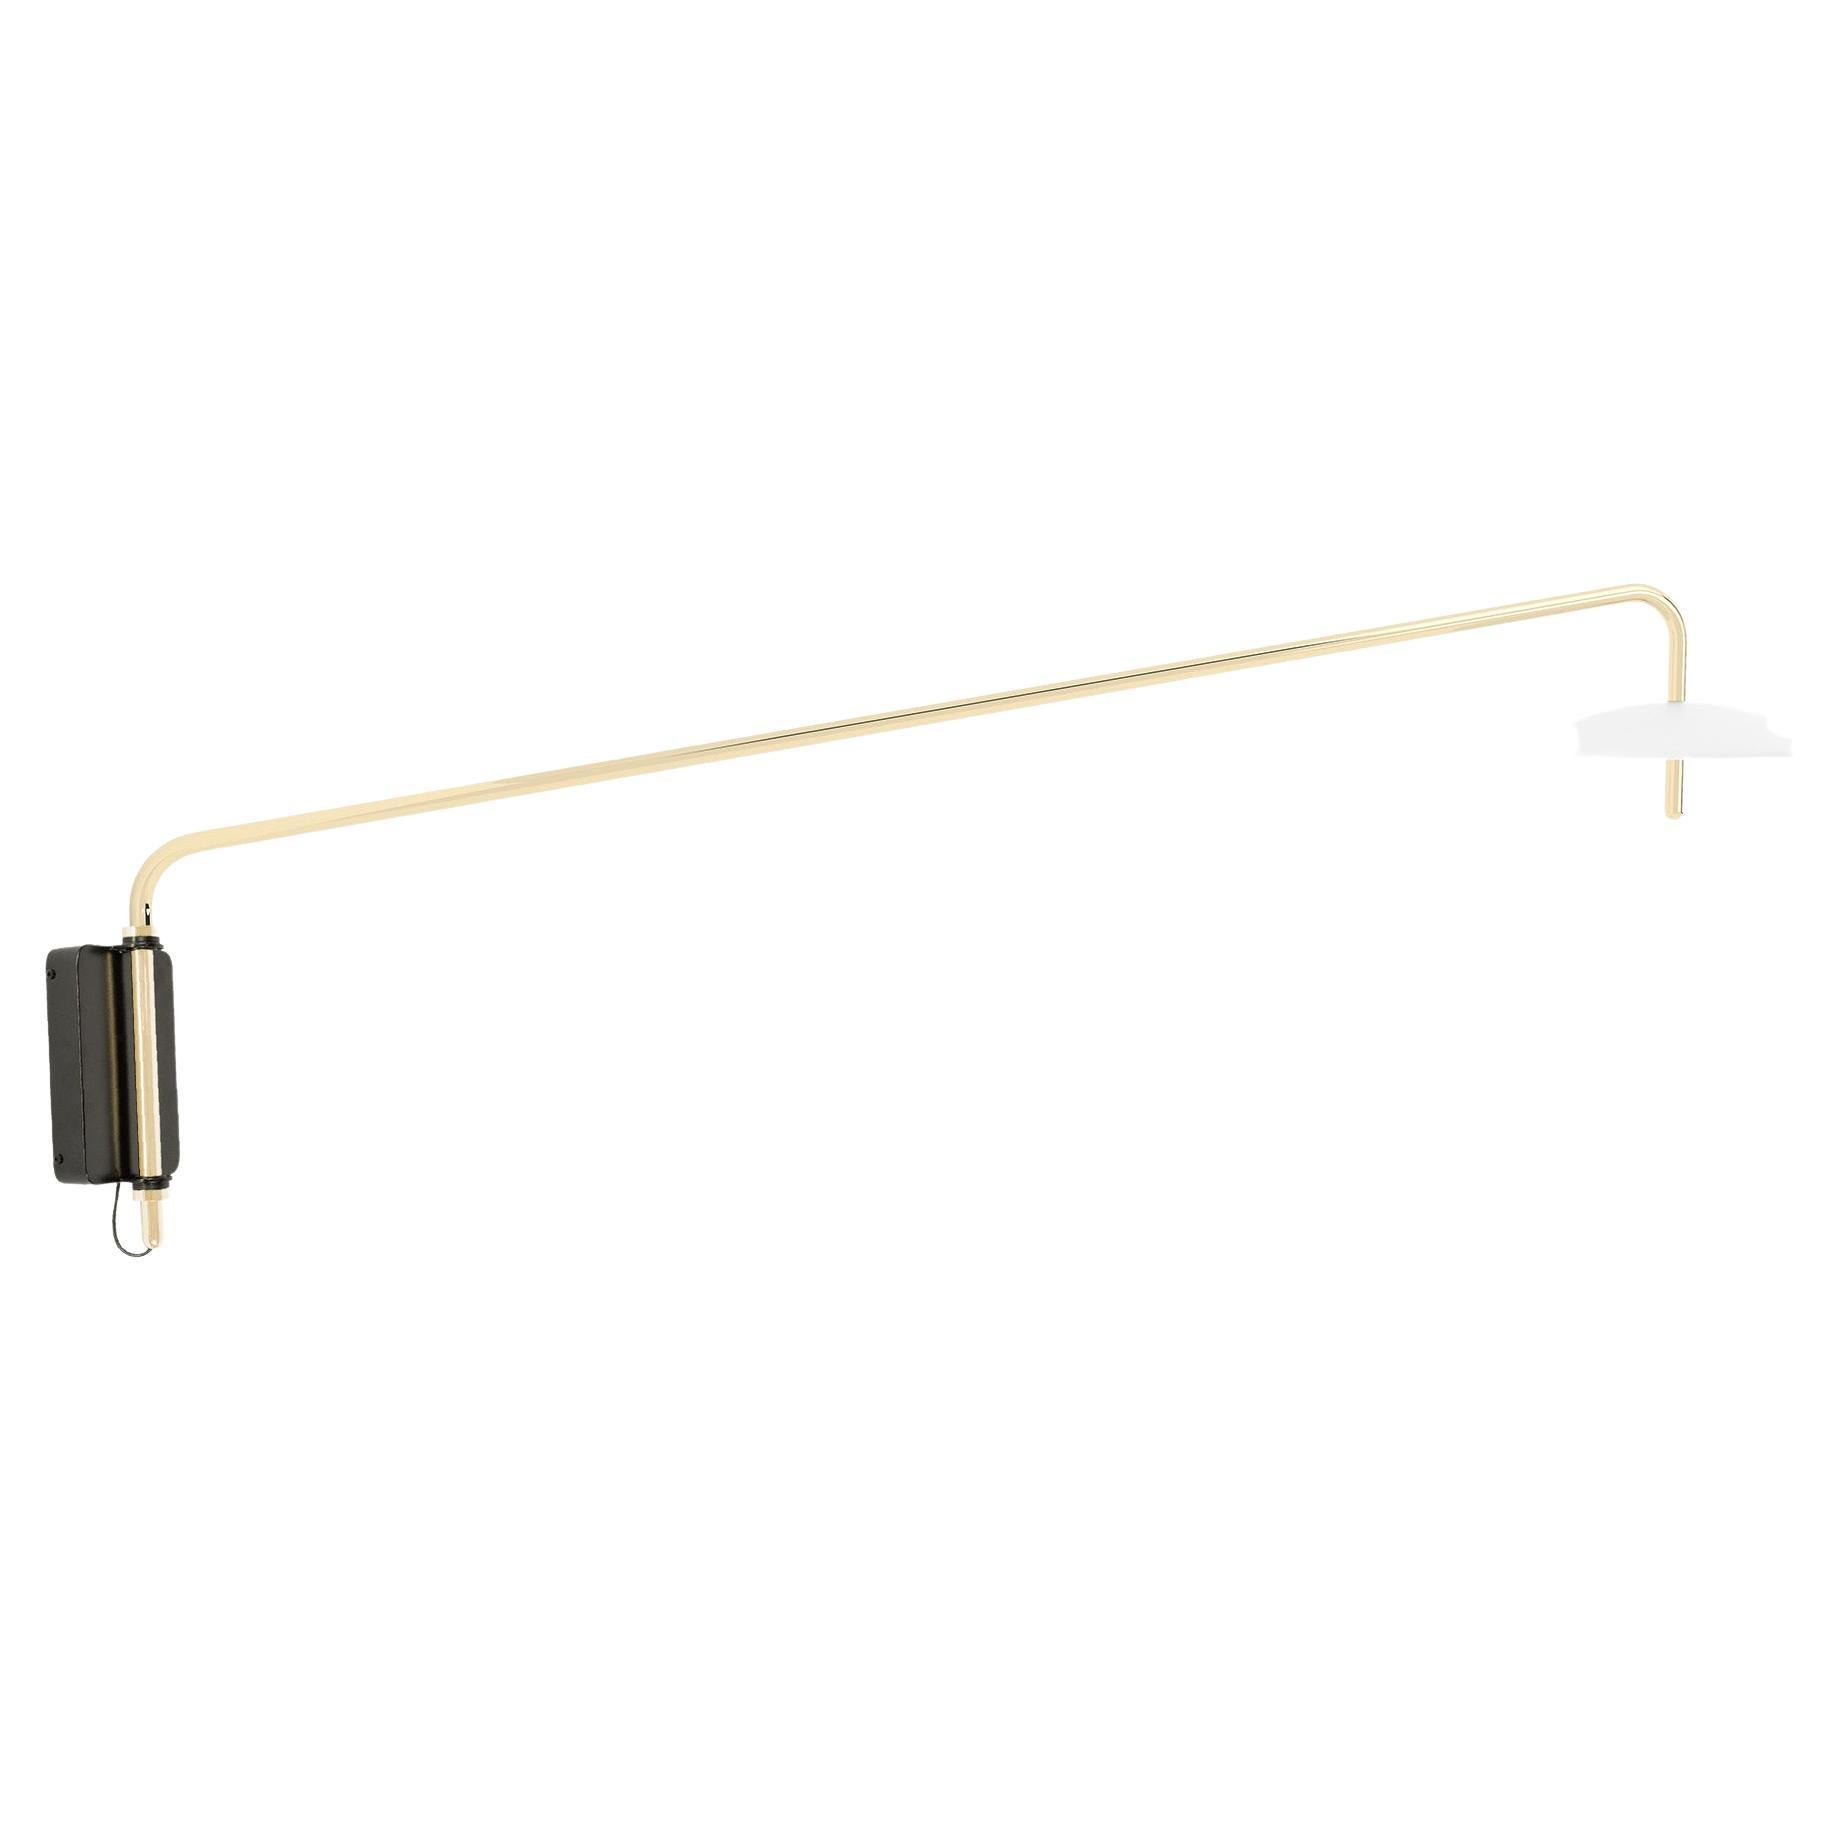 Signal Arm Sconce in White X Brass, Long, Hardwire, by Souda, Made to Order For Sale